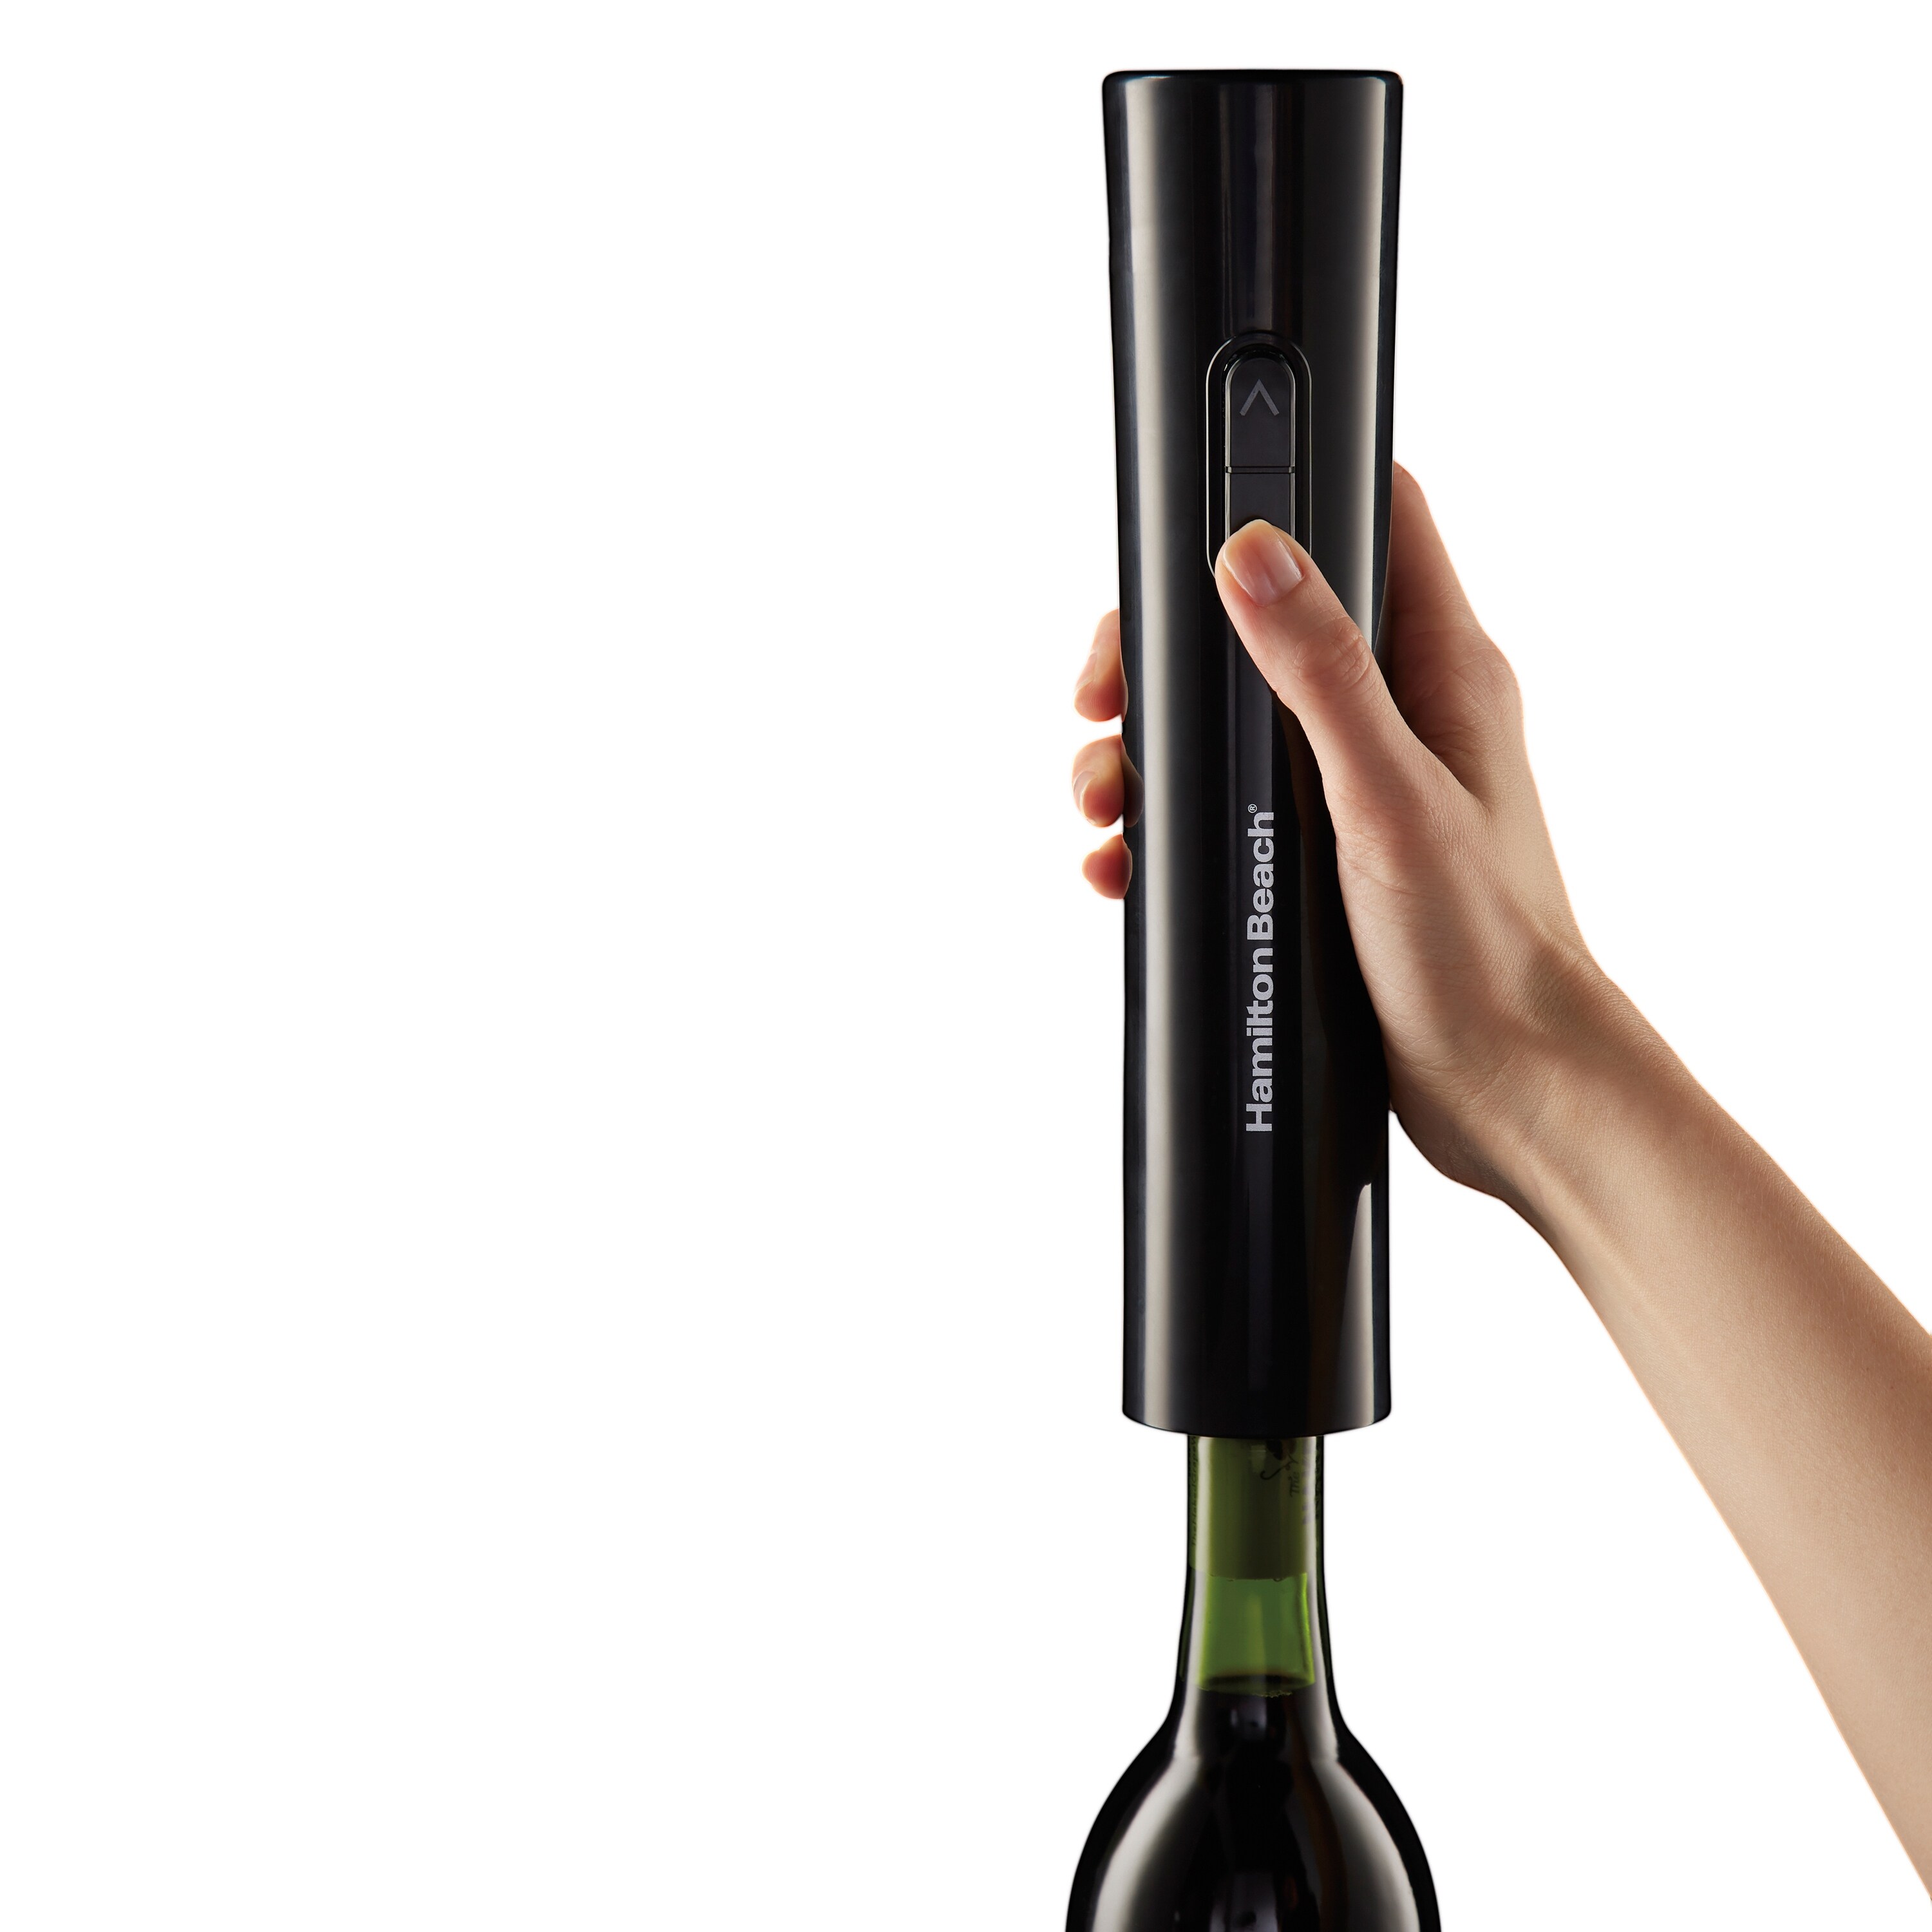 https://ak1.ostkcdn.com/images/products/is/images/direct/29c49f8a73f3f4980413576350742b9850a3e5cd/Cordless-Electric-Wine-Opener.jpg